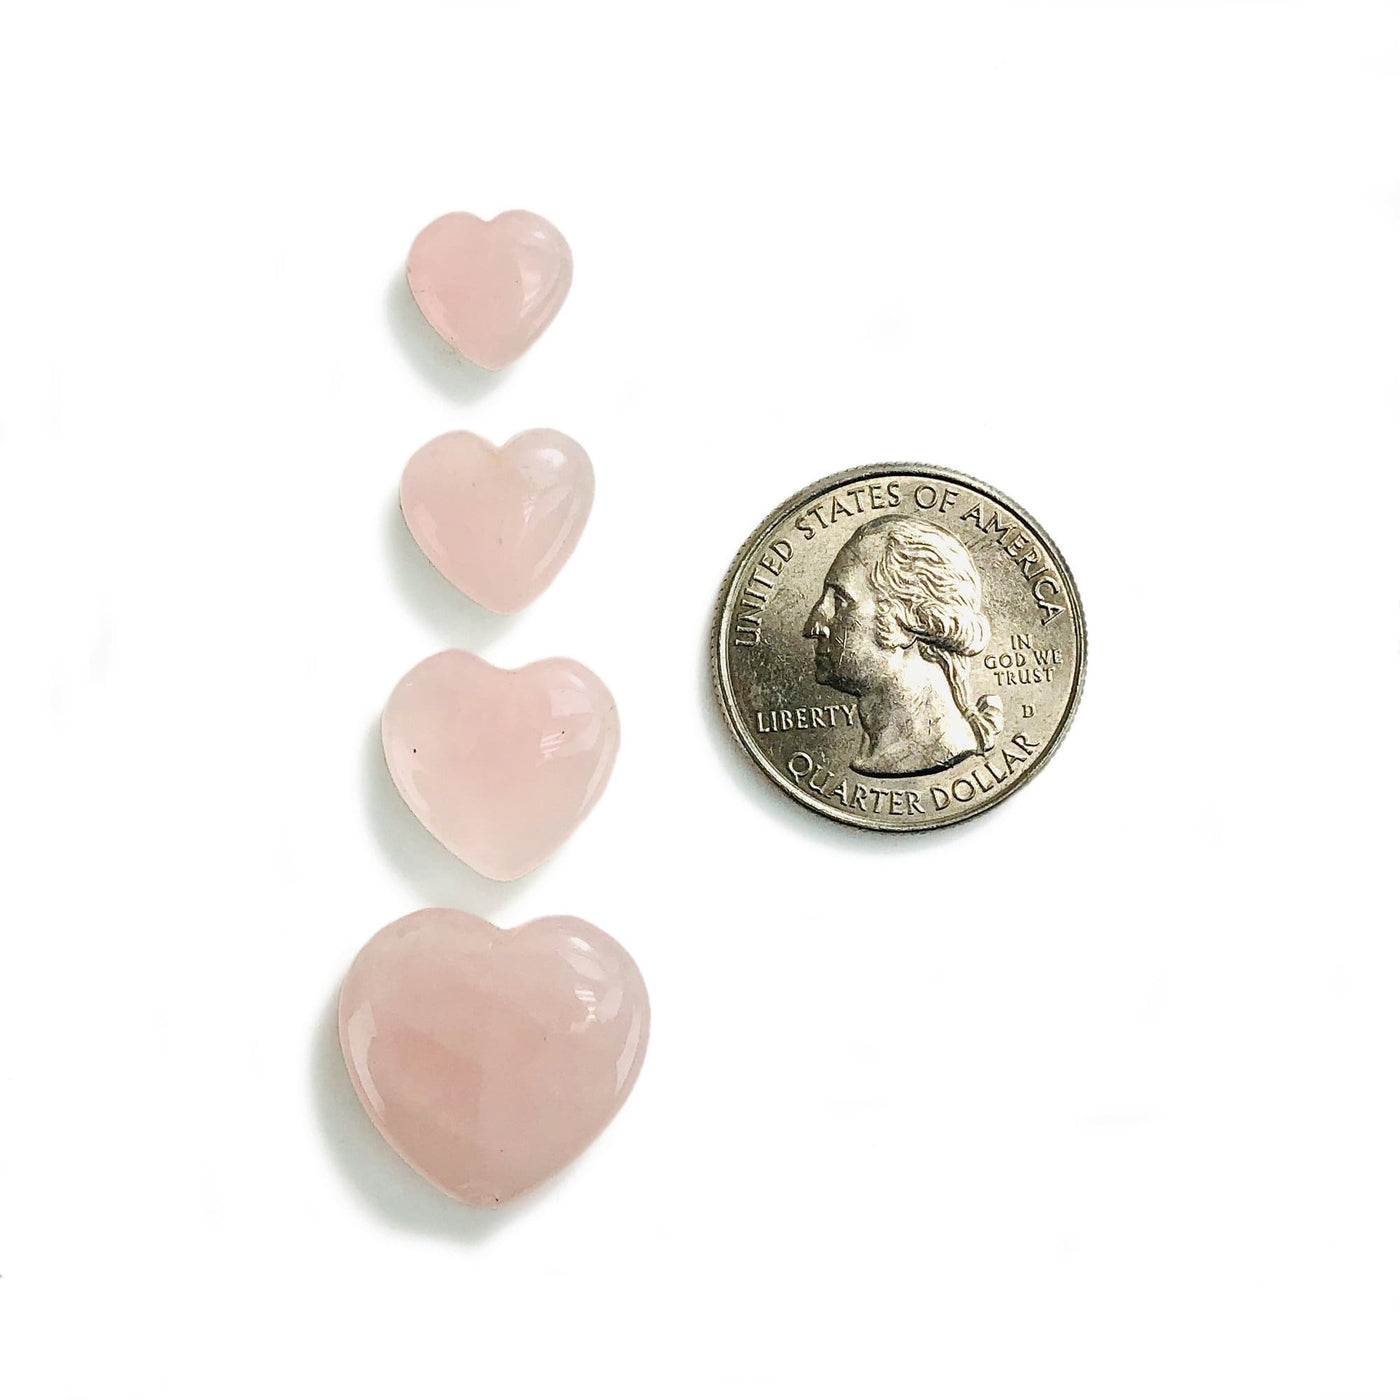 4 Rose Quartz Hearts next to a quarter for size reference on white background